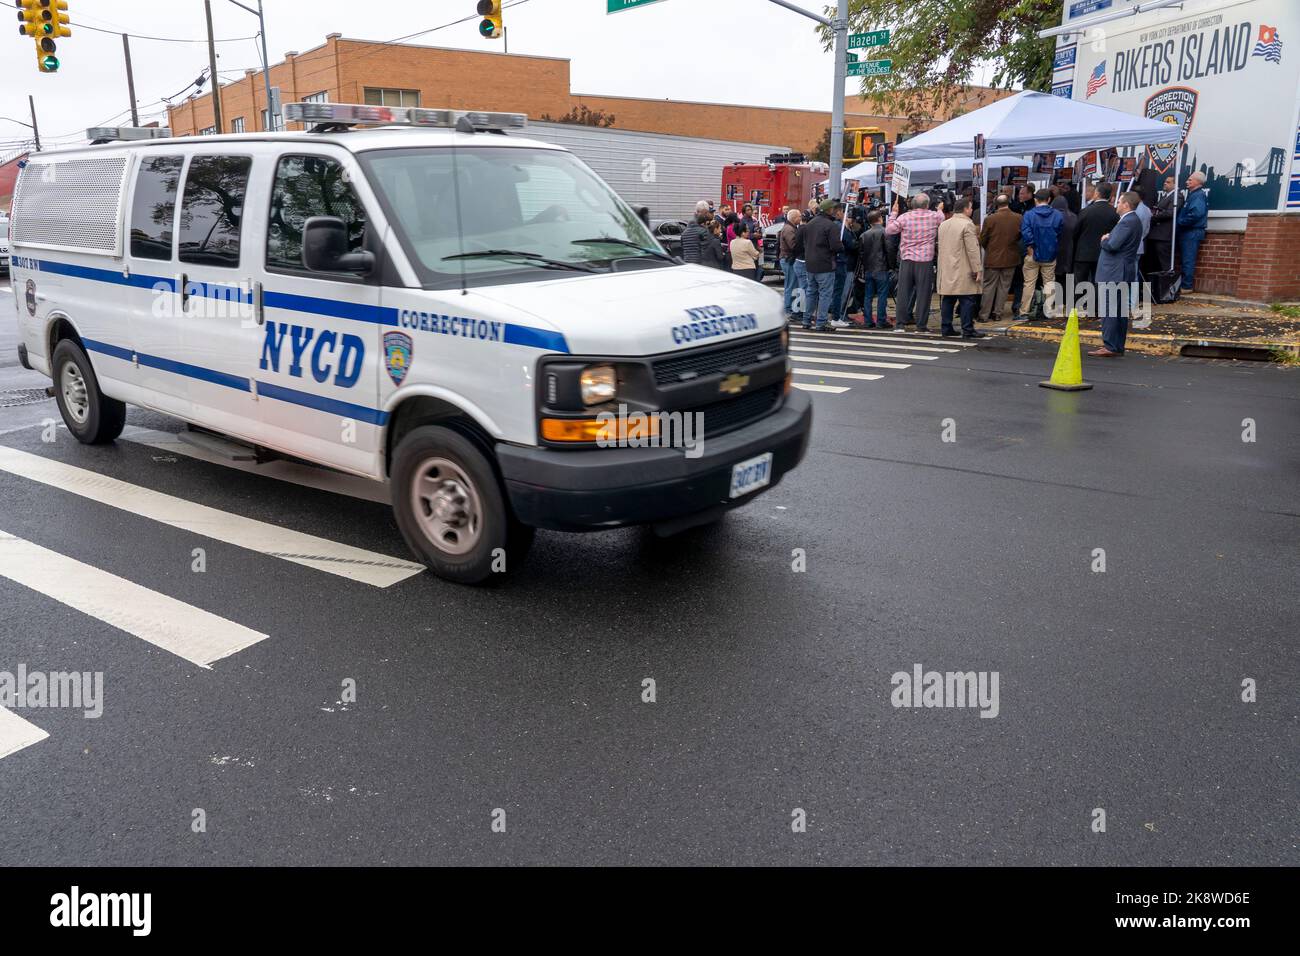 NEW YORK, NEW YORK - OCTOBER 24: A New York City Department of Correction vehicle seen near an endorsement press conference by the New York City Correction Officers Benevolent Association (COBA) of Congressman Zeldin for Governor of New York next to the Rikers Island sign on October 24, 2022 in the Queens borough of New York City.  Congressman Zeldin is endorsed by many of New York State law-enforcement unions. Stock Photo